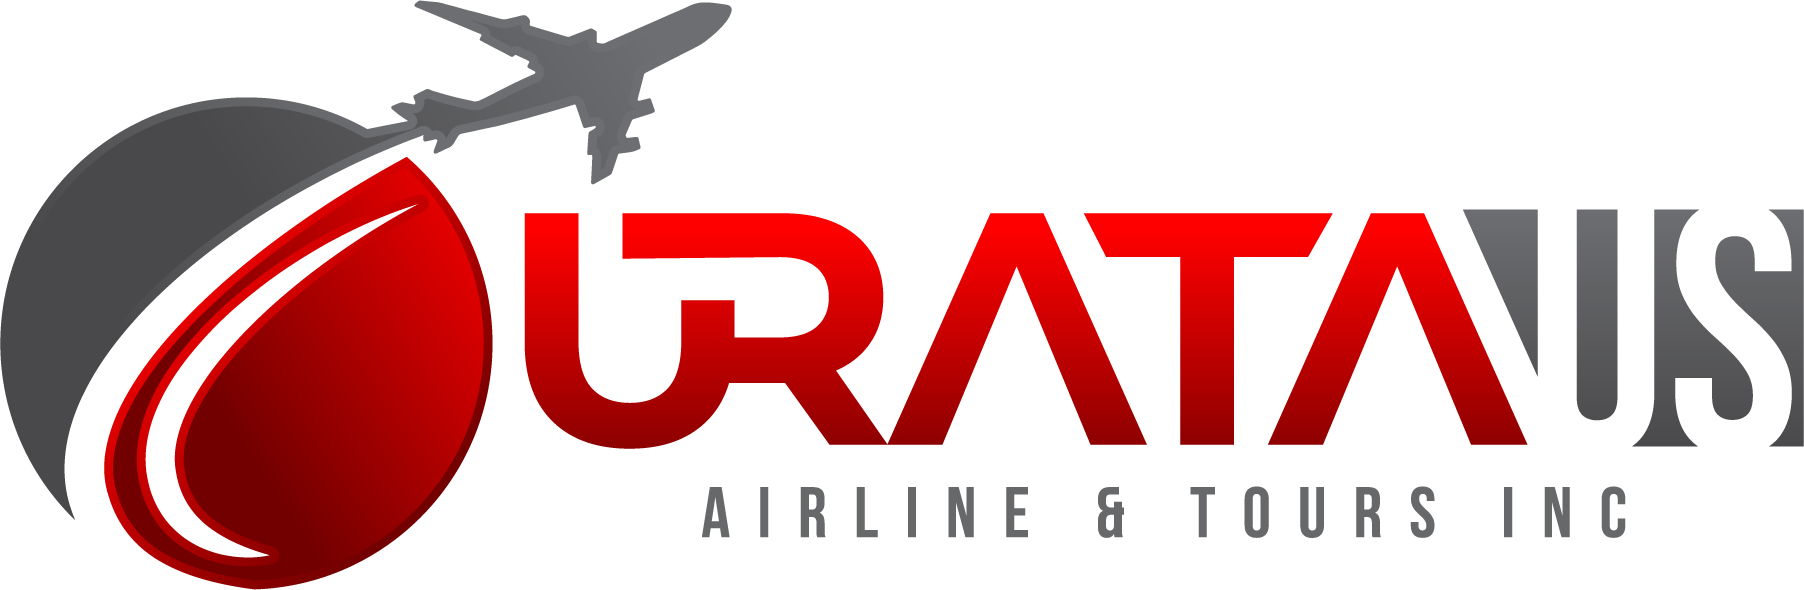 URATA US AIRLINE & TOURS, INC – WE ARE A JET CHARTER COMPANY